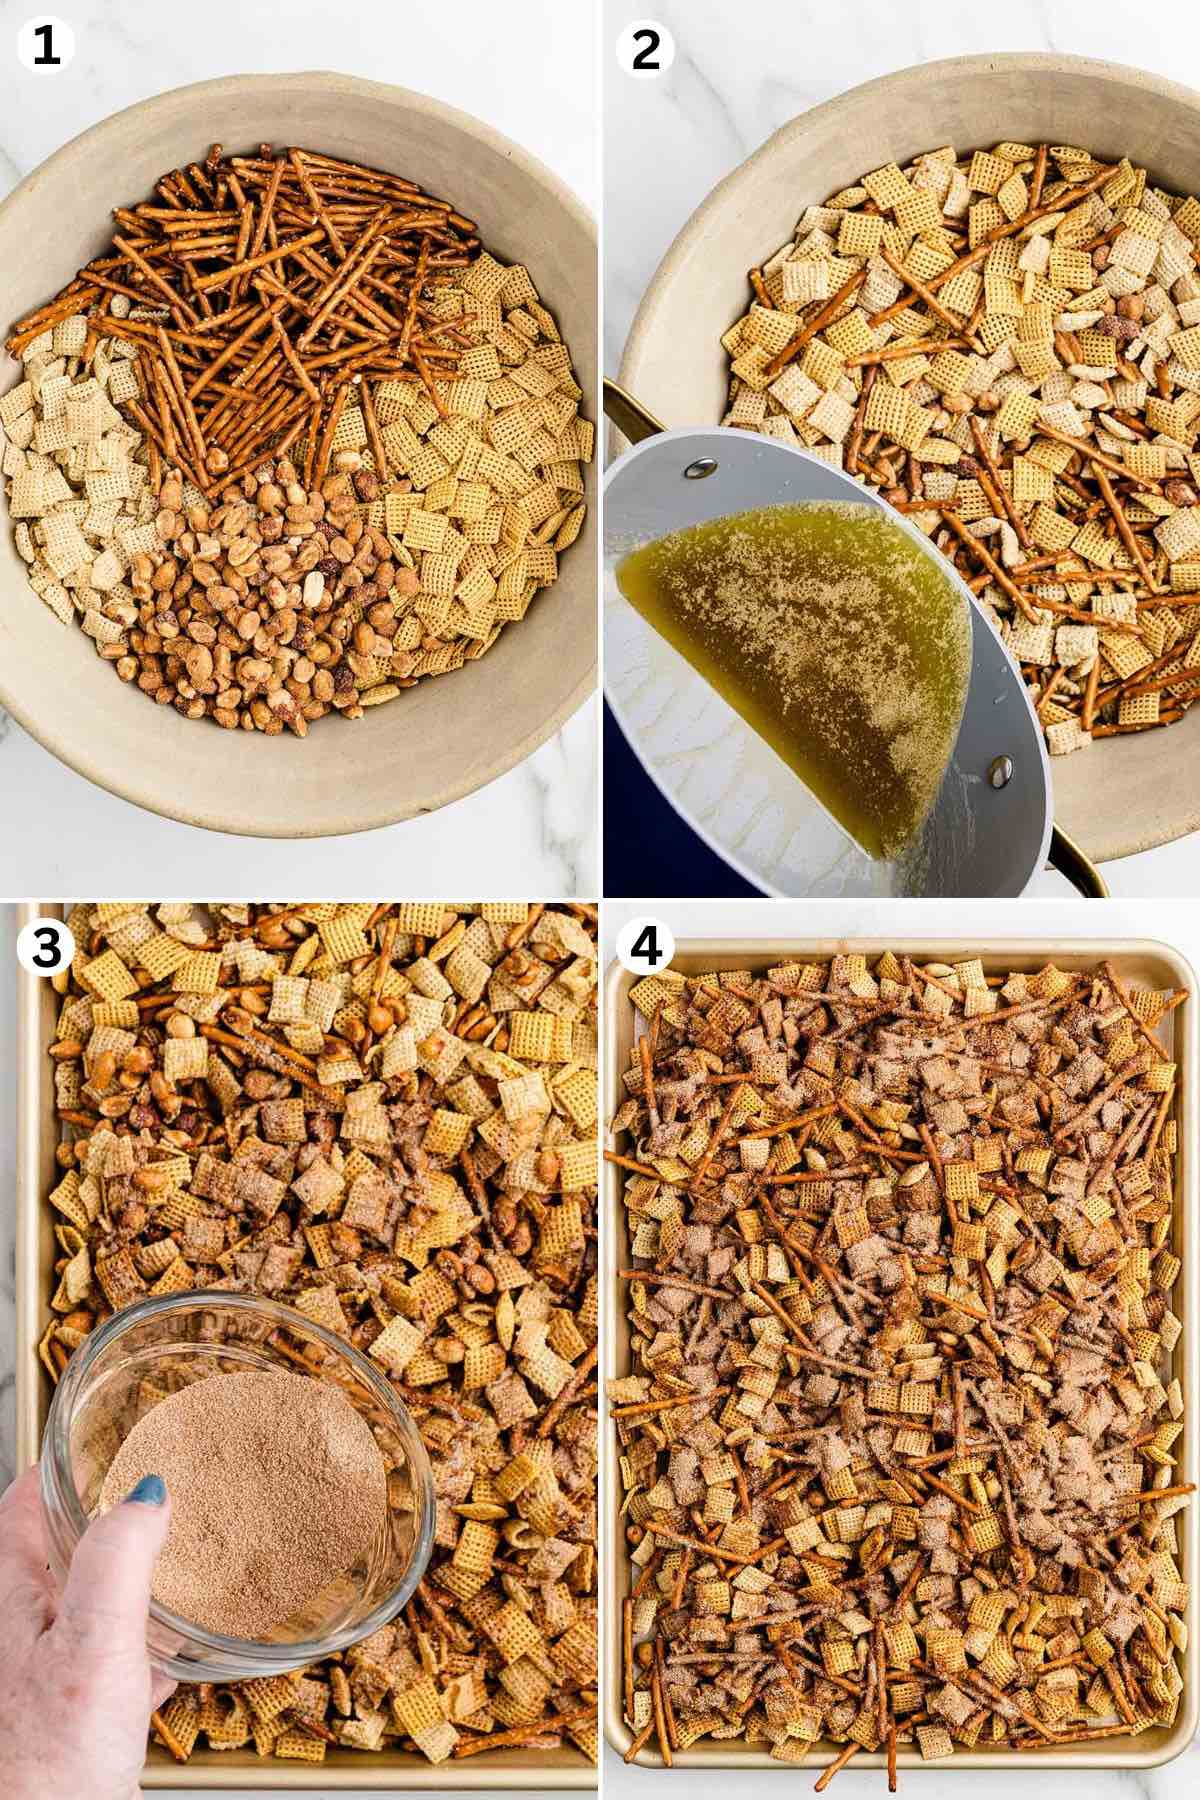 put all ingredients in a big bowl. Pour melted butter and mix to coat. Spread mixture in baking sheet and sprinkle with cinnamon sugar mix. Toss to coat.